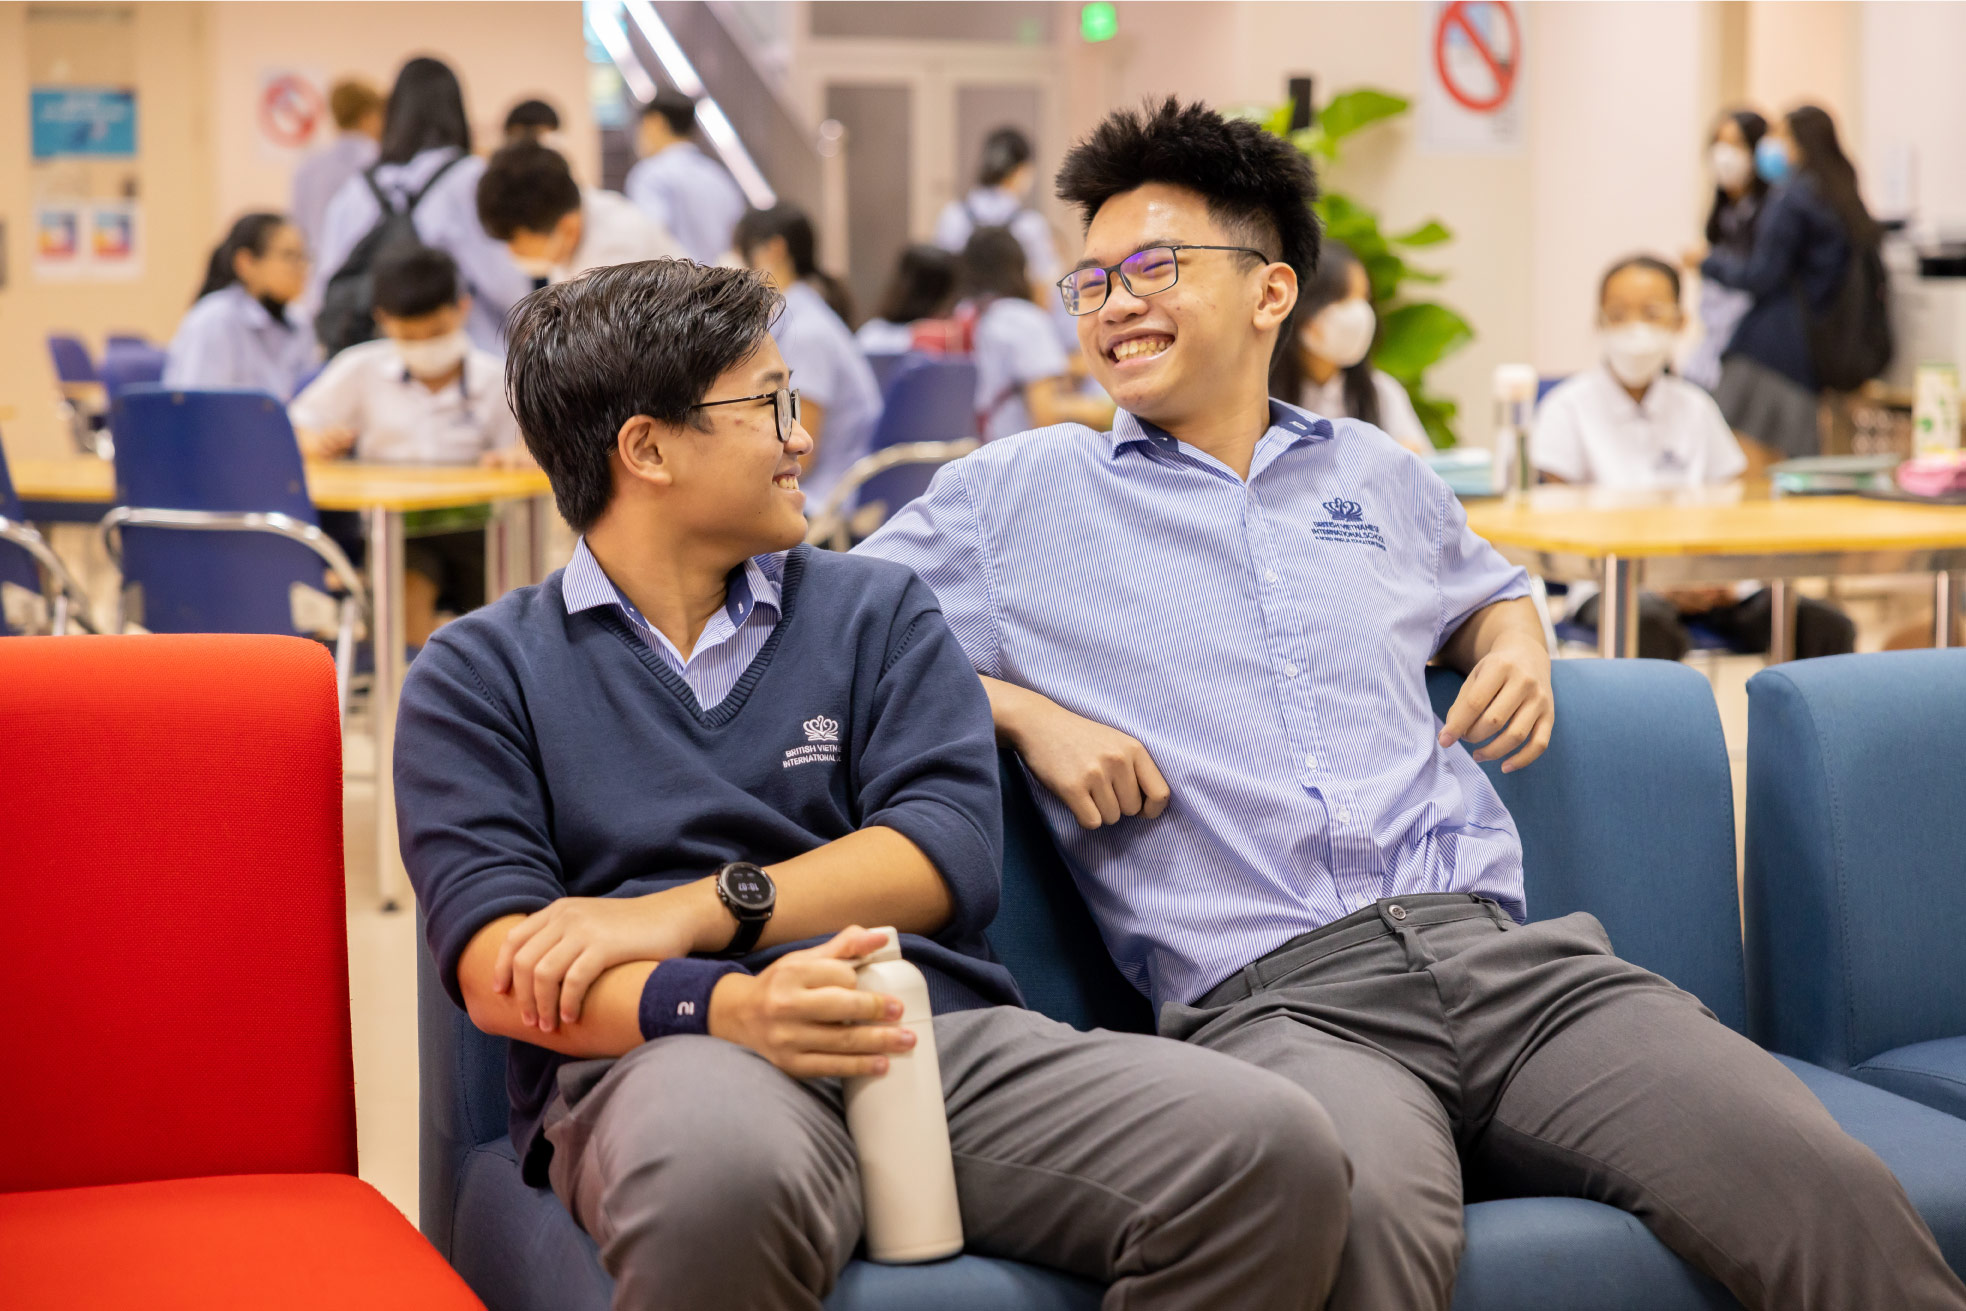 Happy students achieve more: a revolutionary shift on the importance of wellbeing in Vietnam - Five Ways to Well-being